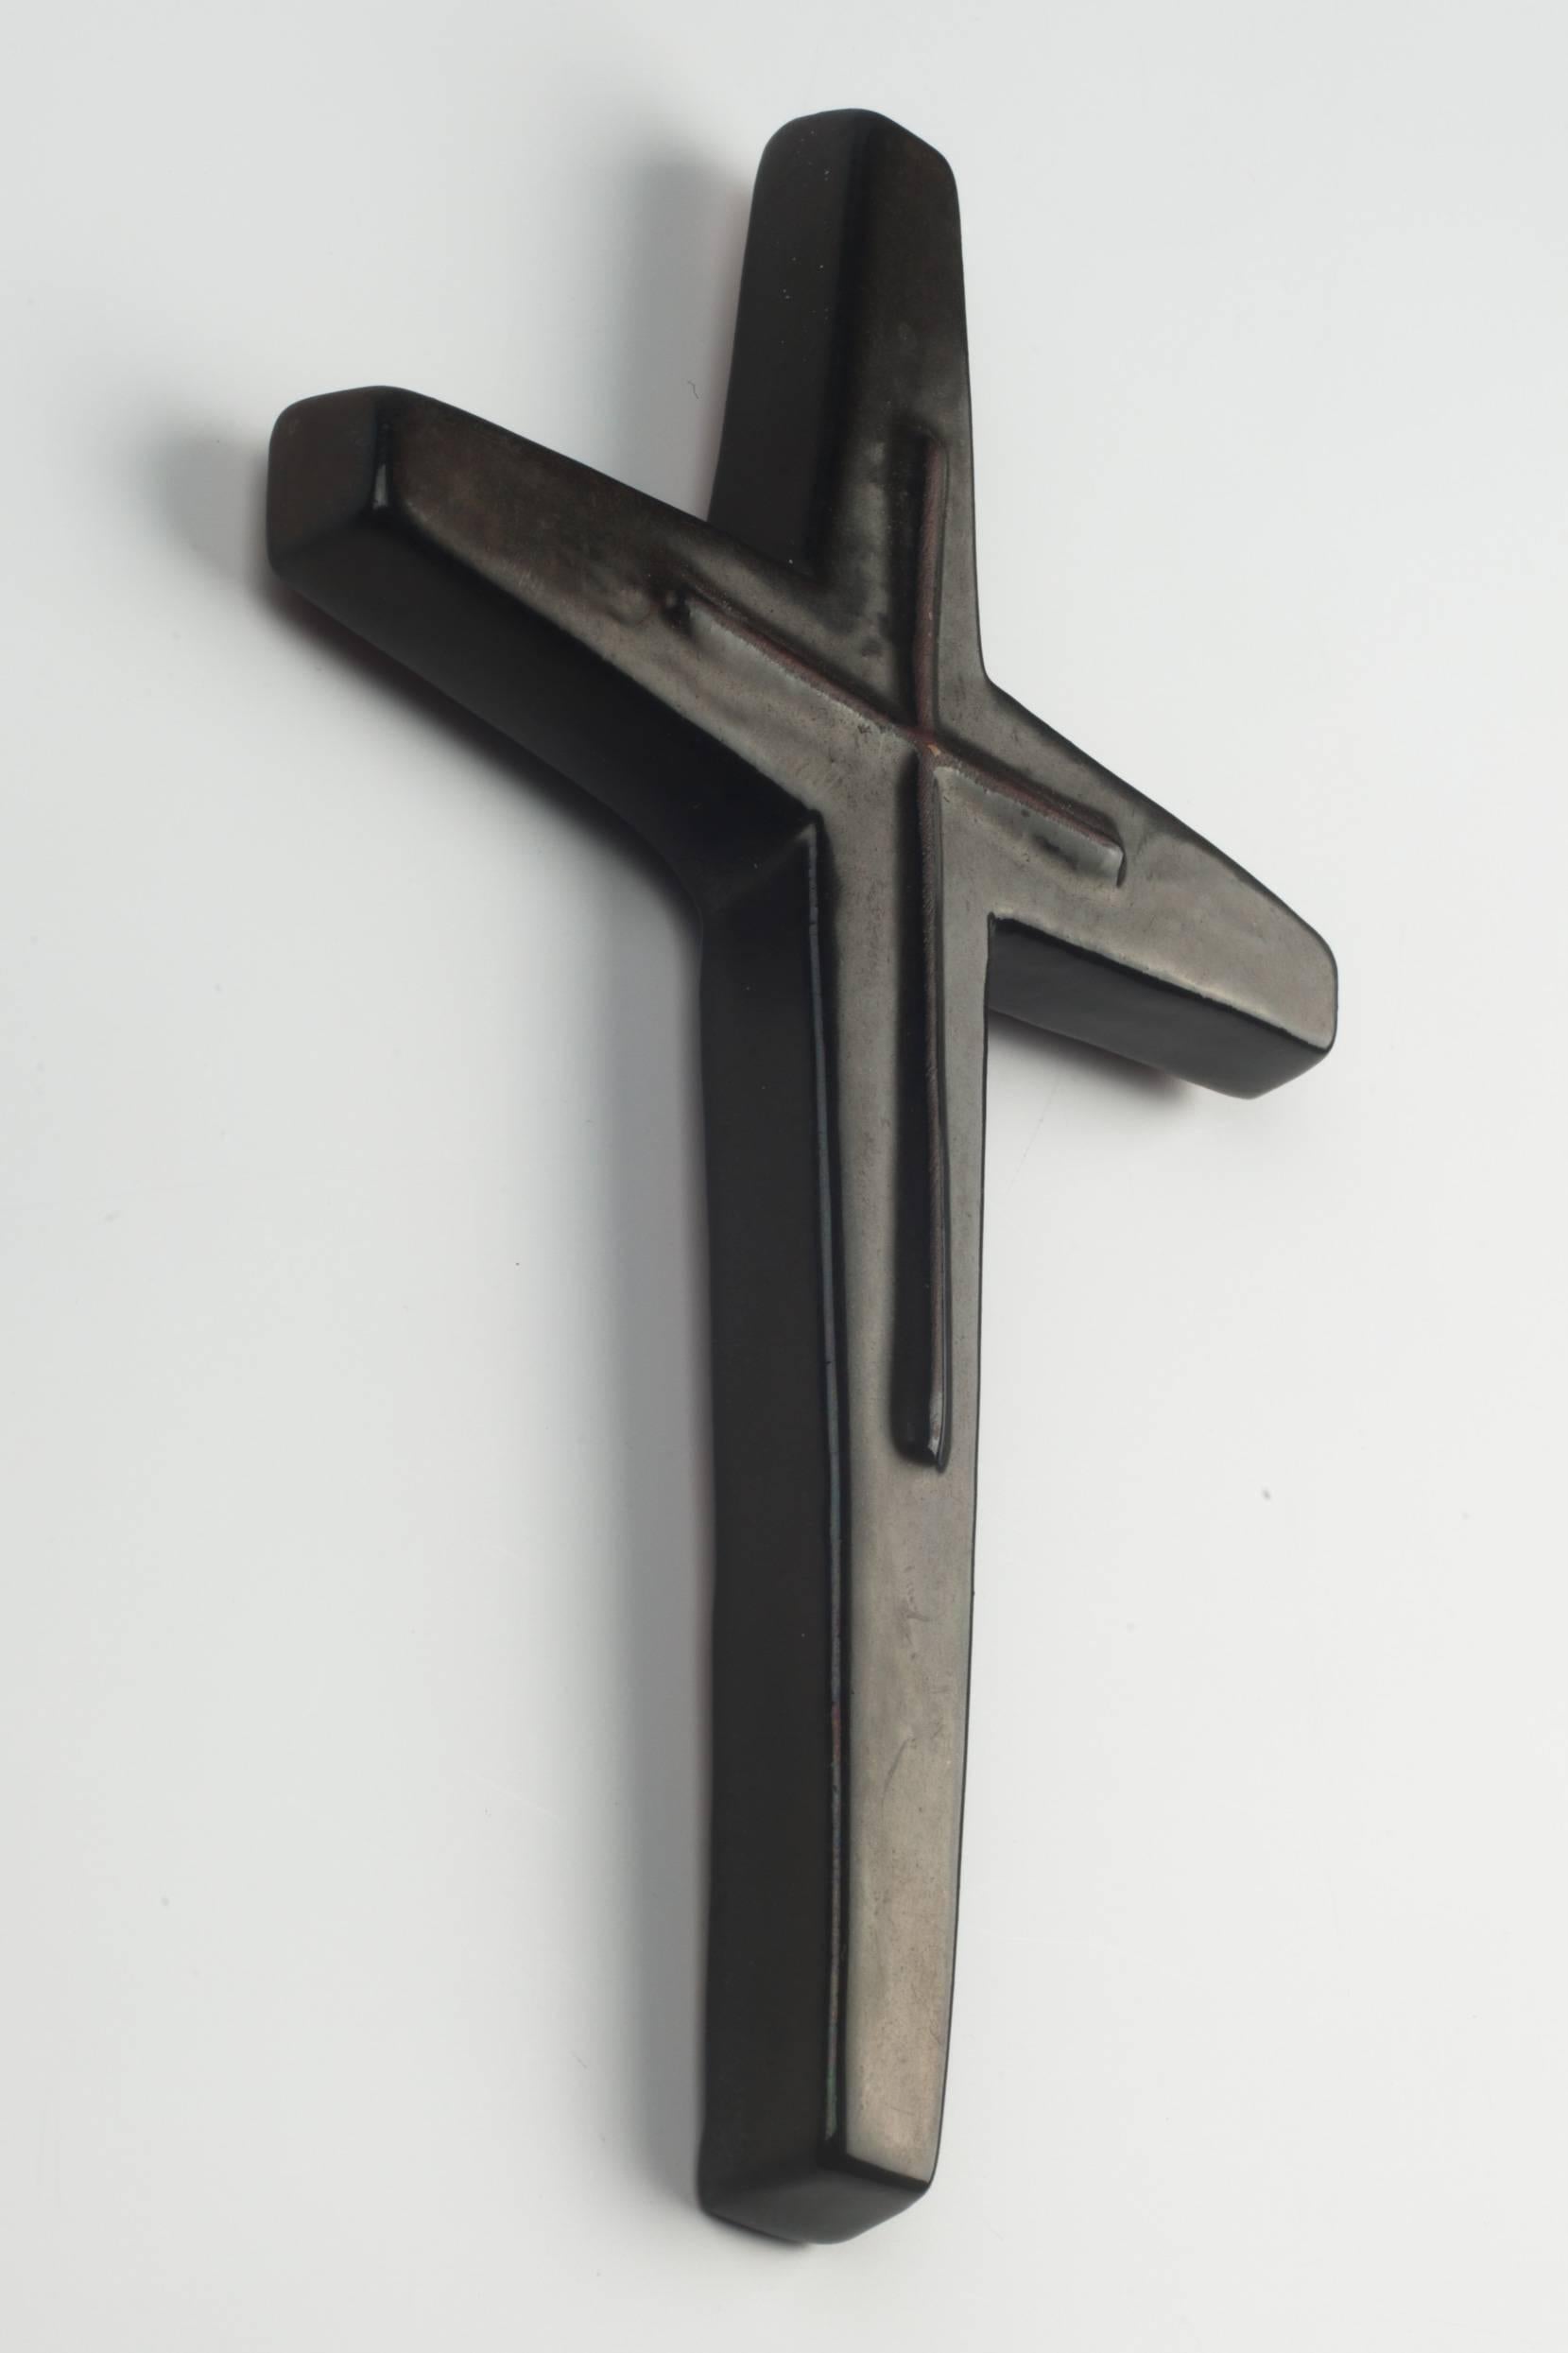 Nearly six inch tall wall crucifix in ceramic, made in Belgium in the 1950s.
Dark brown cross in volume placed inside a dark brown cross. 

This piece is part of a 69 piece ceramic crucifix collection, all made in Belgium between the 1950 and late